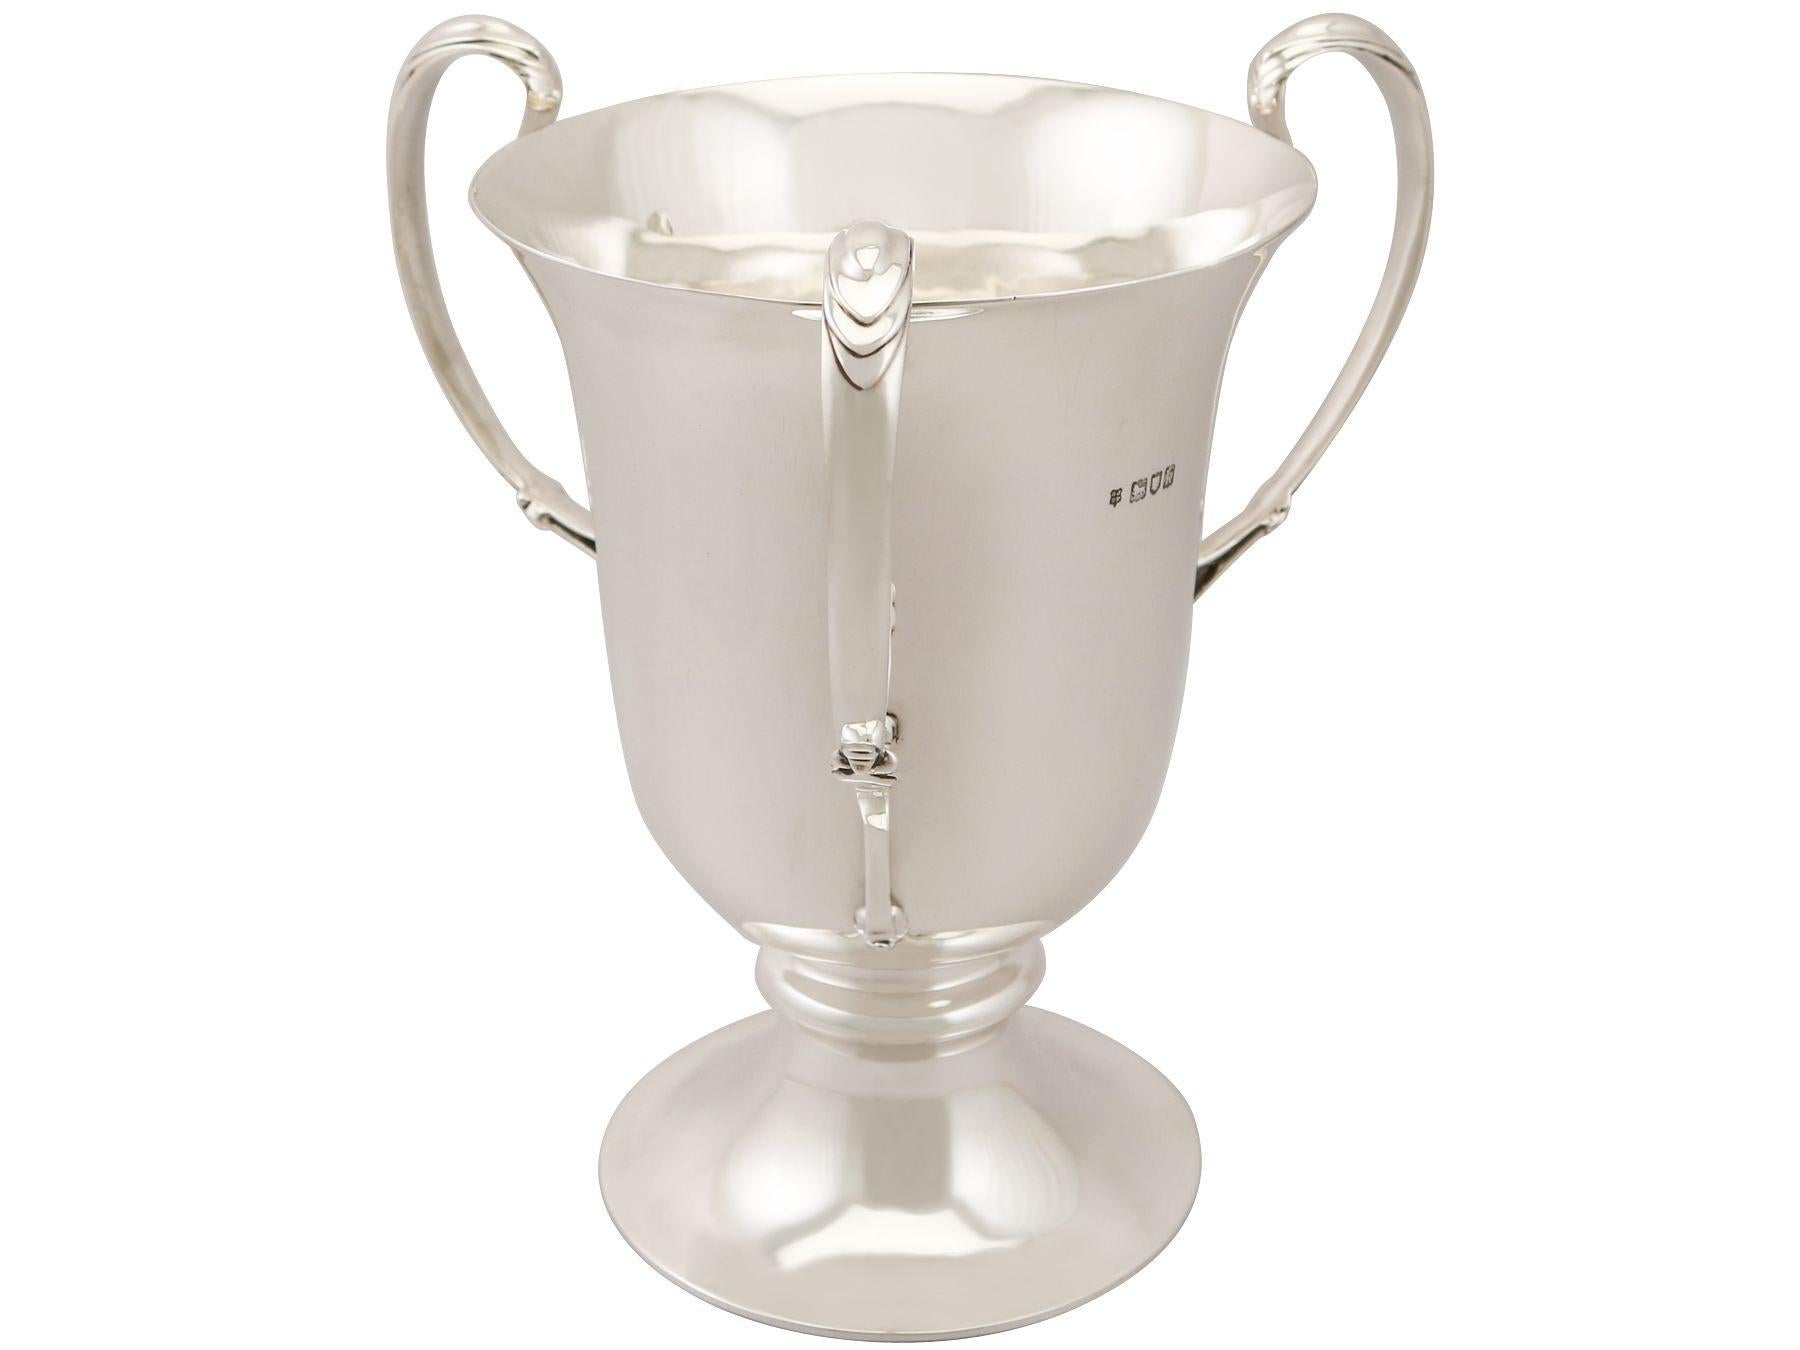 An exceptional, fine and impressive antique Edwardian English sterling silver Art Nouveau, tyg style presentation cup / bottle holder; an addition to our ornamental silverware collection.

This exceptional antique Edwardian sterling silver tyg*